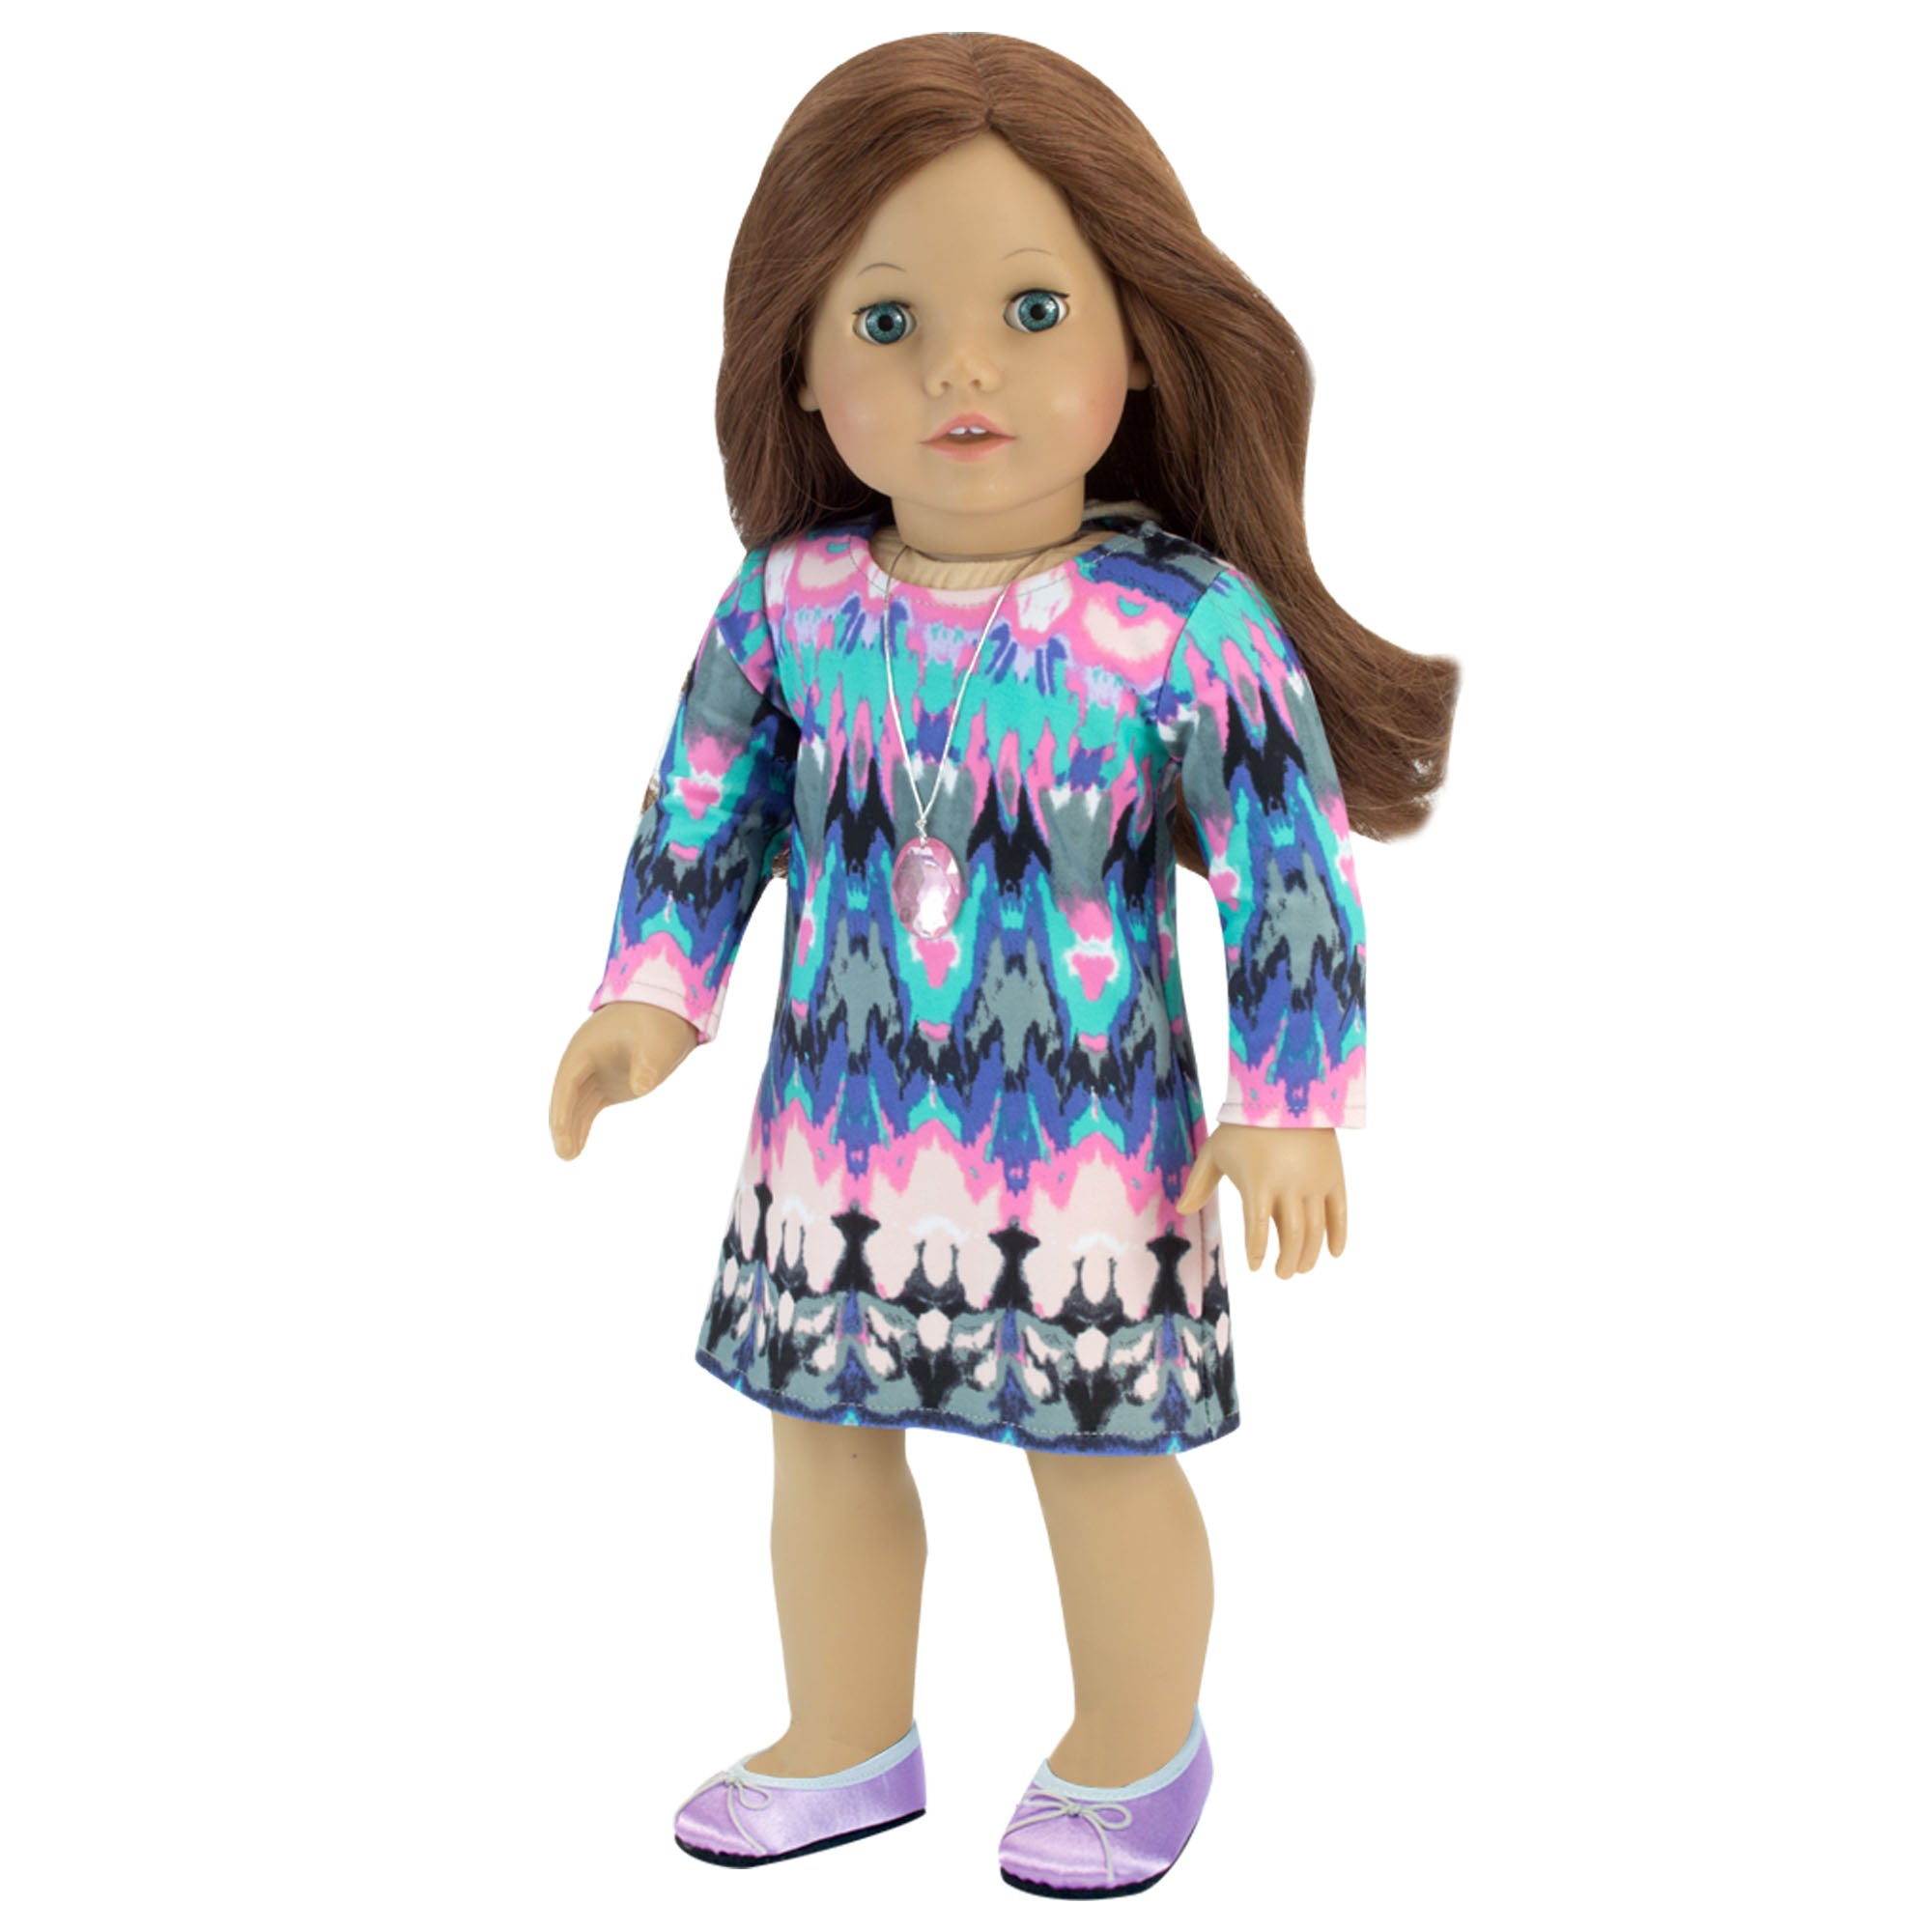 Sophia’s Watercolor Ikat Print Long-Sleeved T-Shirt Jersey Dress with Pink Rhinestone Necklace for 18” Dolls, Multi